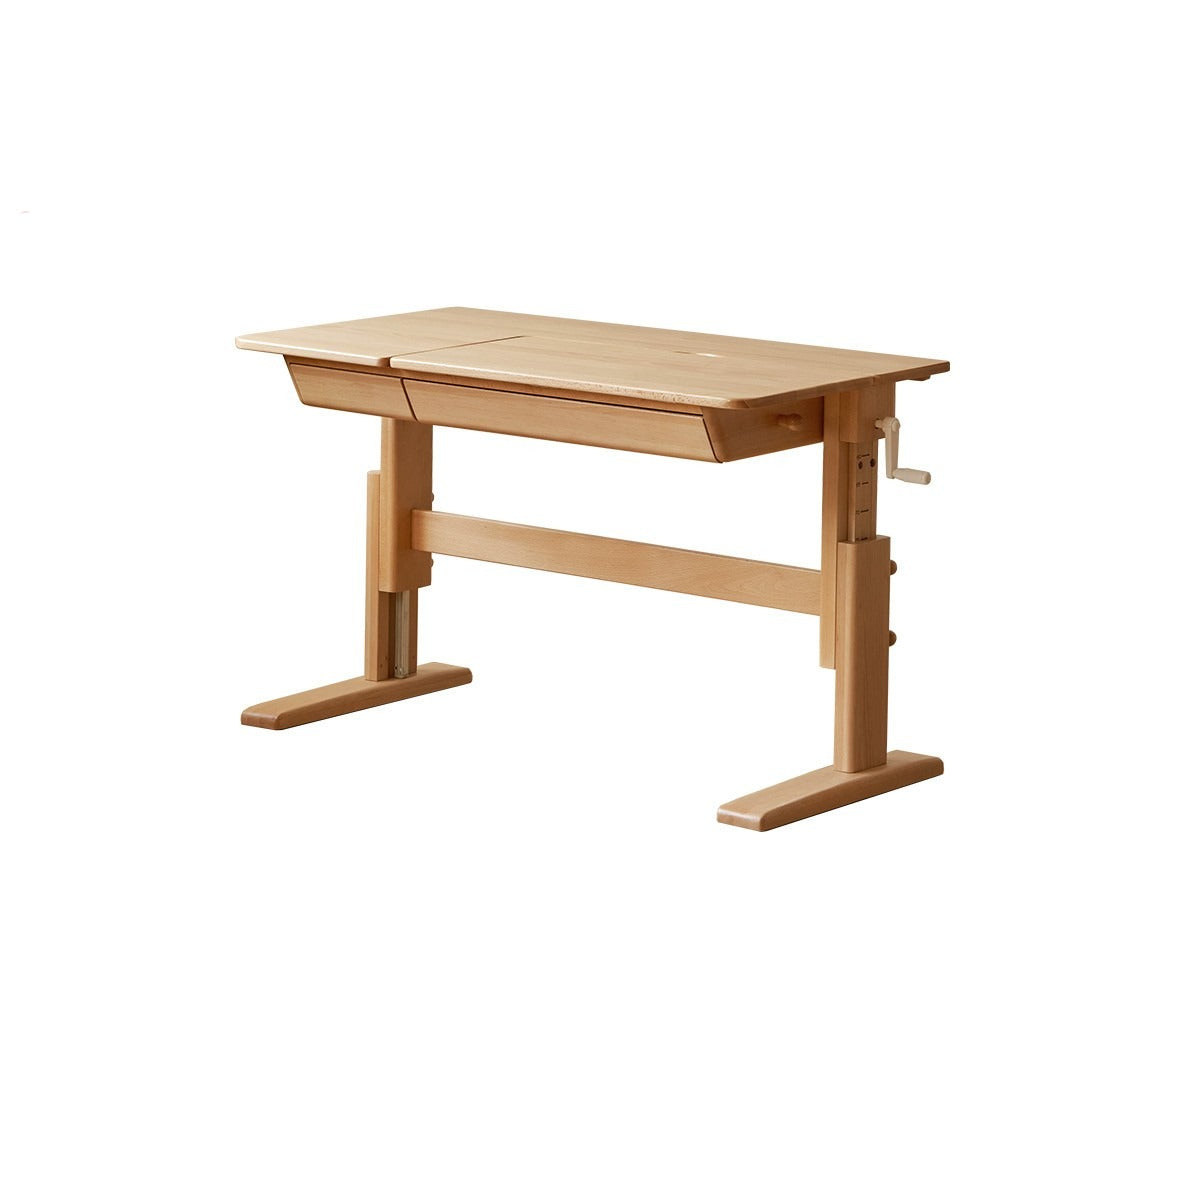 Beech Solid Wood lifting kids table with self/chair/high shelf"